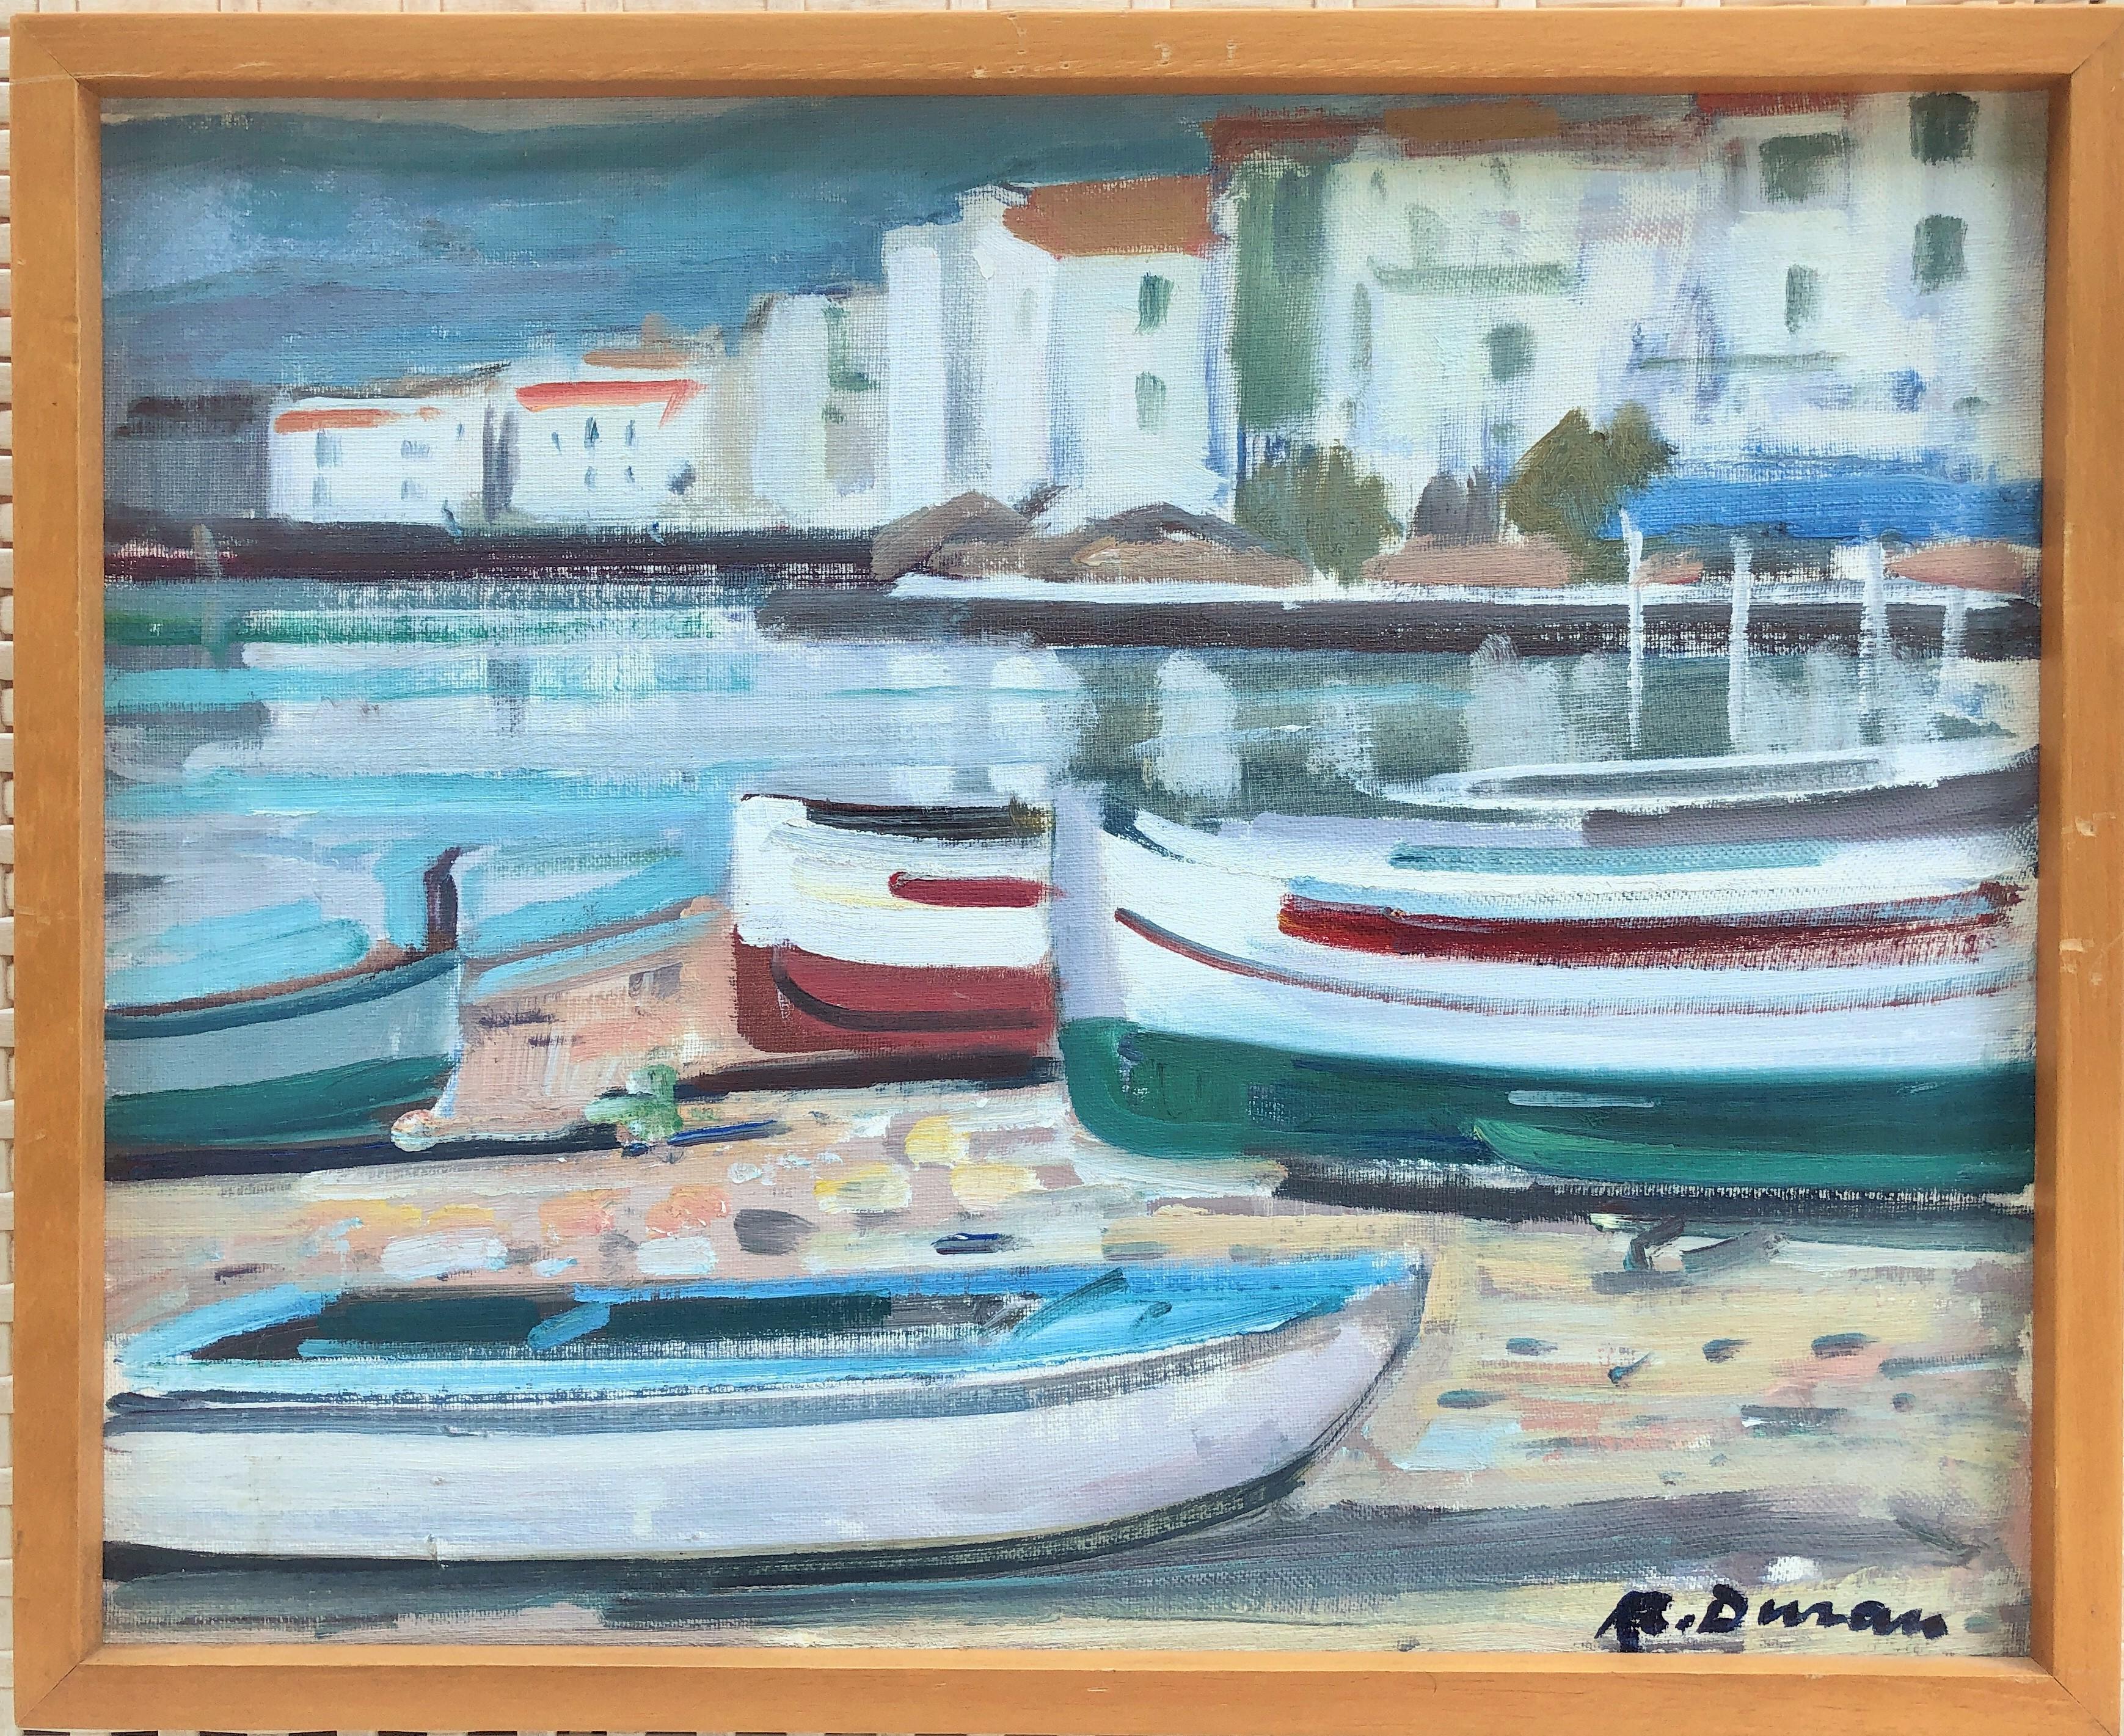 Boats in Cadaques Spain oil painting spanish seascape - Painting by Rafael Duran Benet